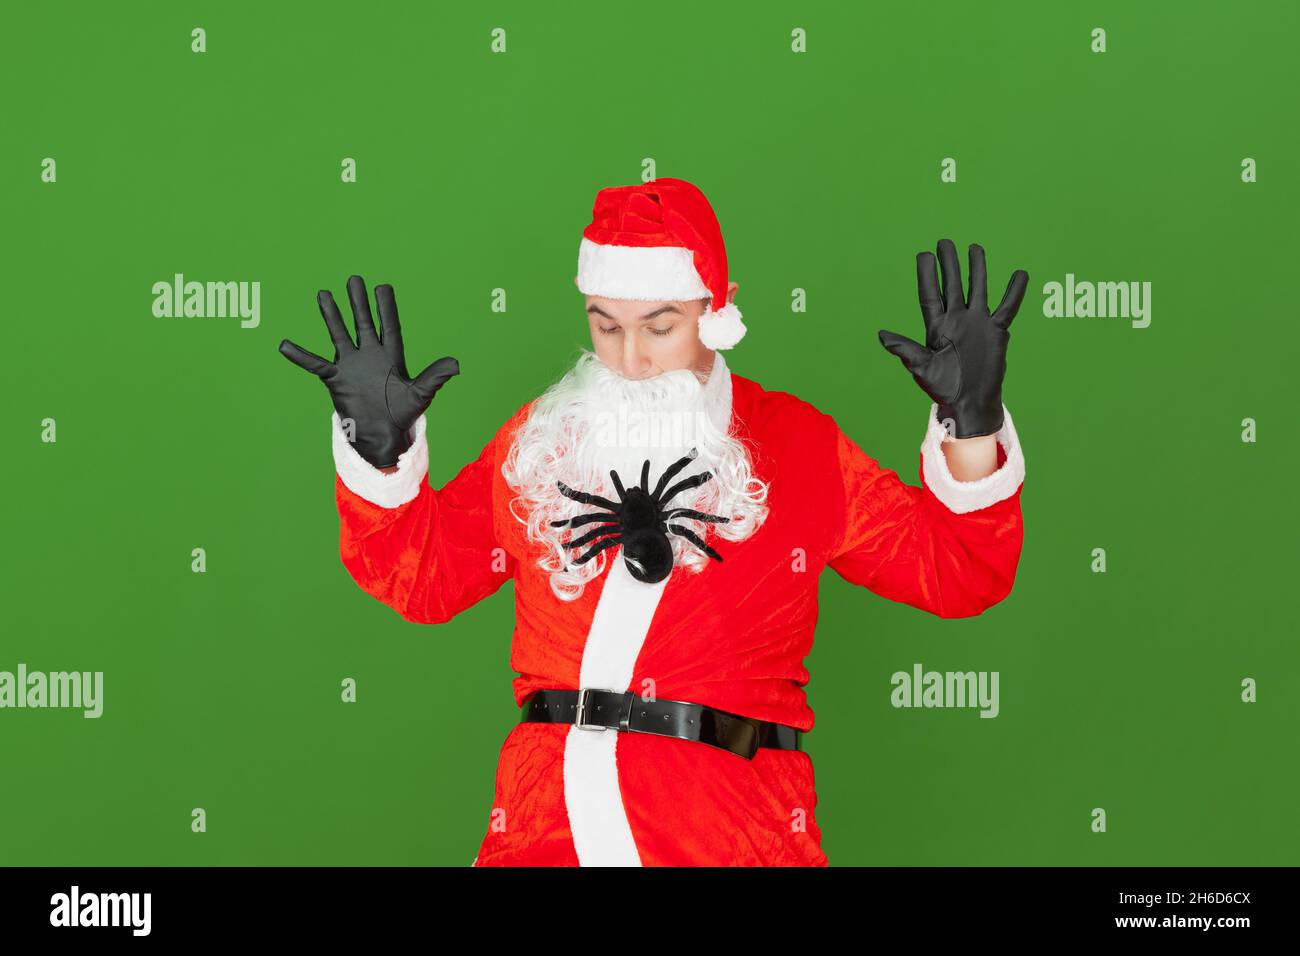 A toy spider is climbing through the beard of an adult Caucasian man dressed as Santa Claus, as he looks on in fright. The background is green. Stock Photo